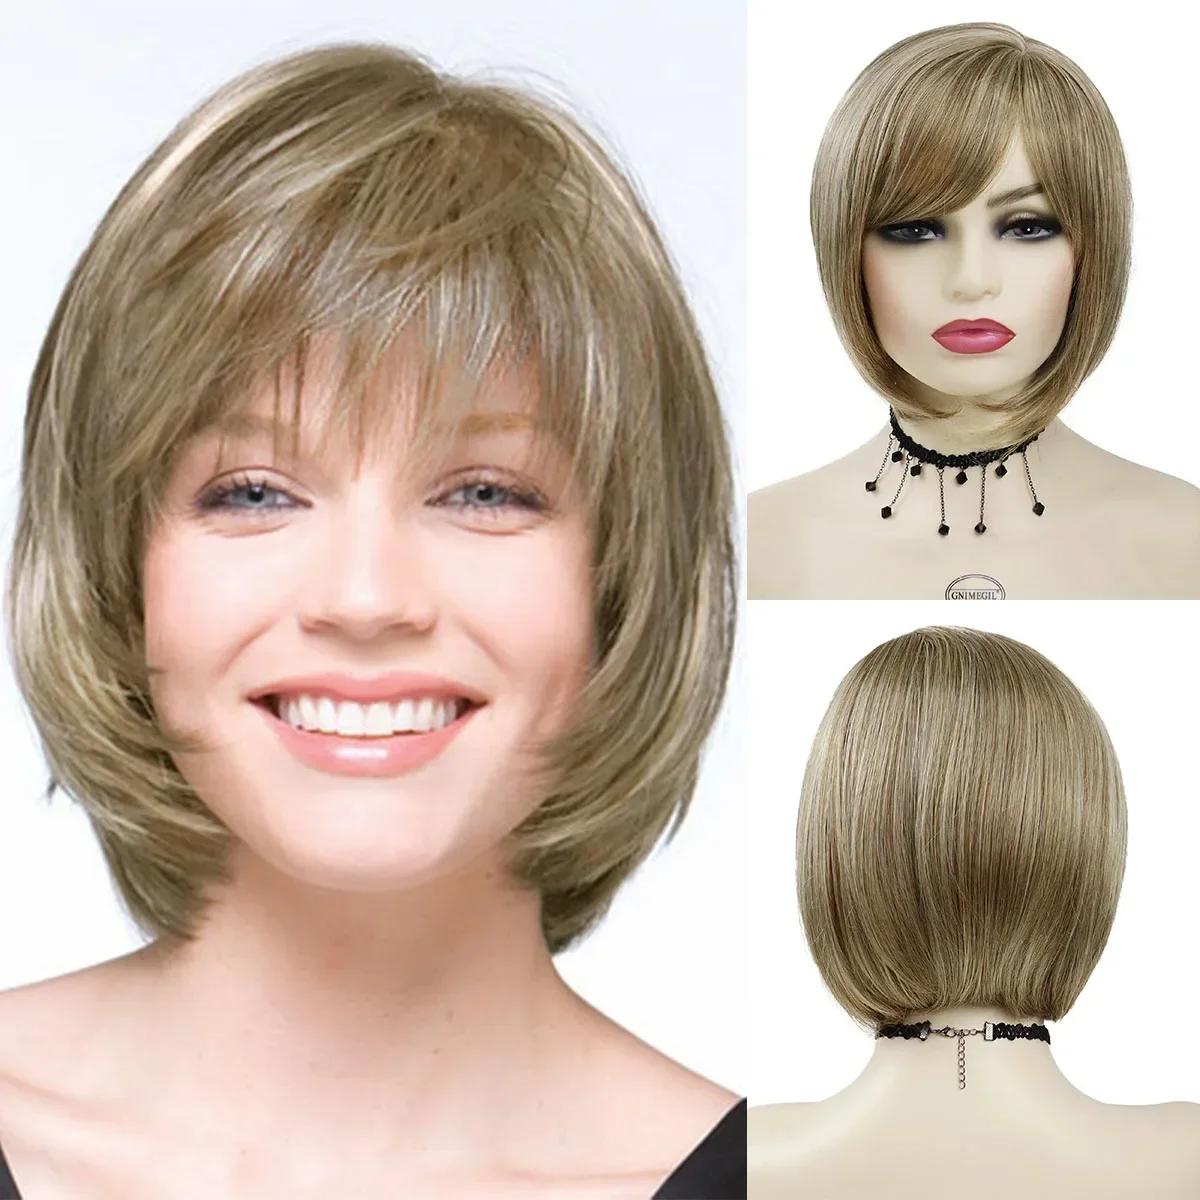 

GNIMEGIL Synthetic Short Blonde Wig for Women Straight Hair Bob Wig with Bangs Natural Soft Daily Cosplay Halloween Lolita Party